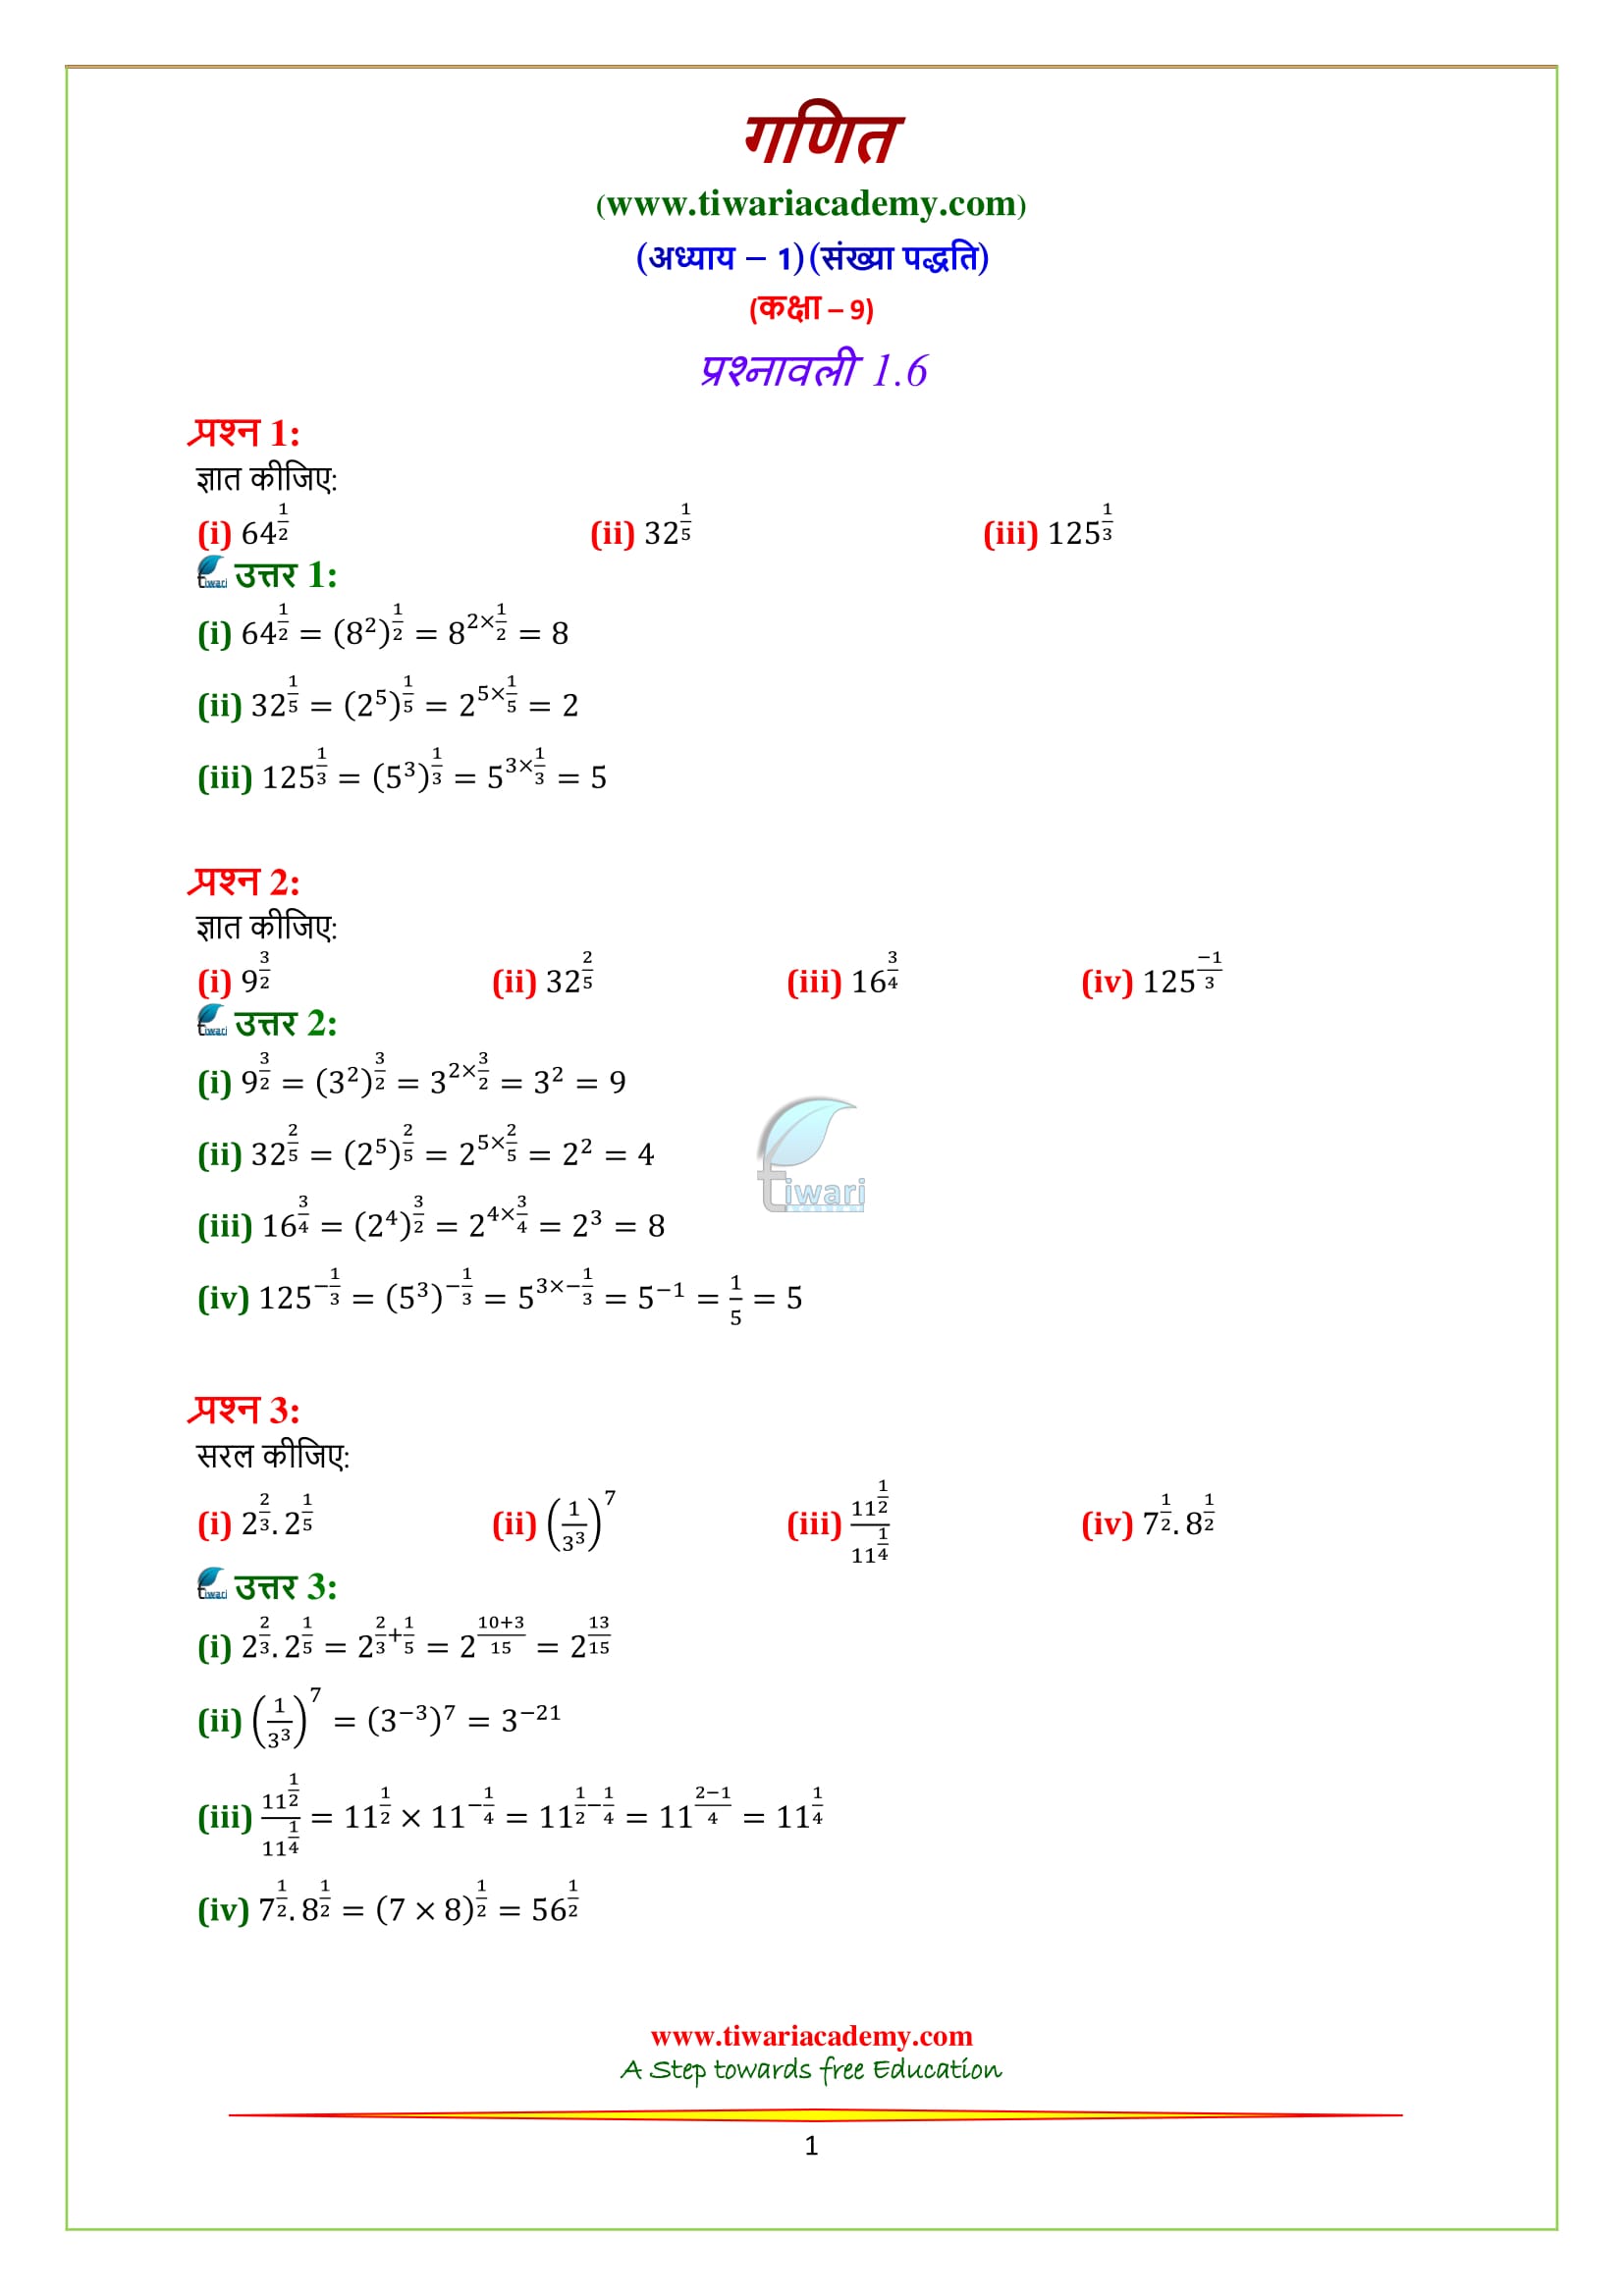 NCERT Solutions for Class 9 Maths Chapter 1 Exercise 1.6